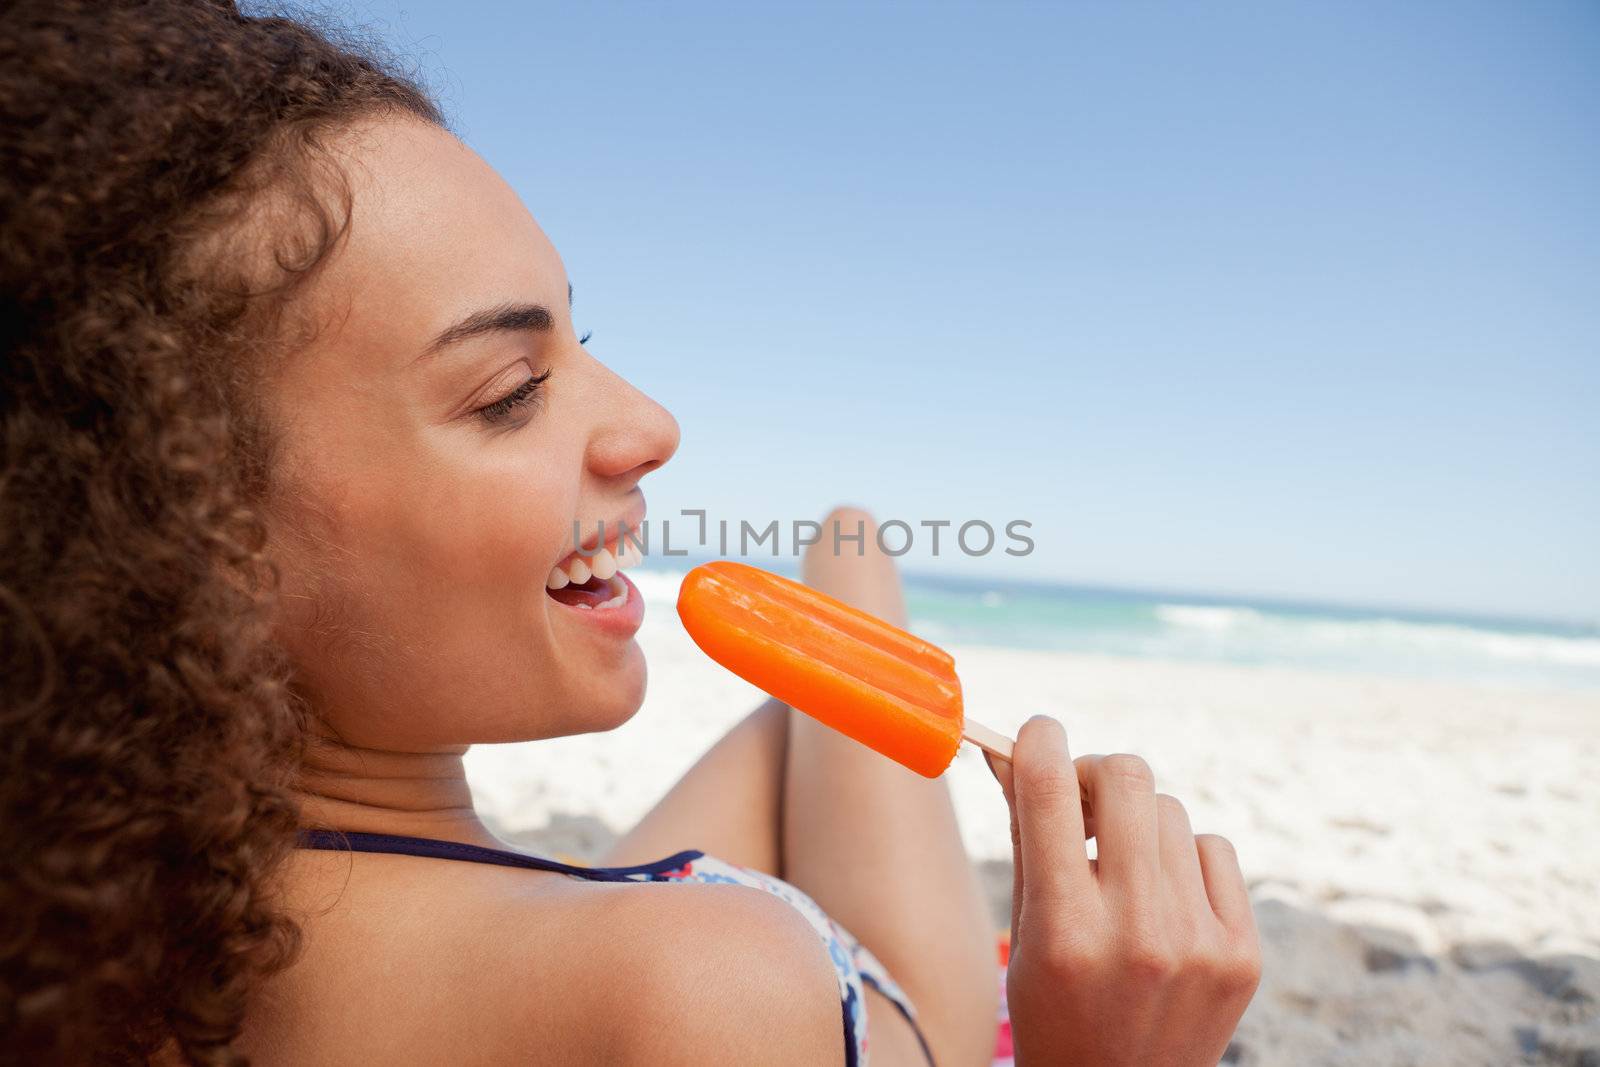 Young smiling woman holding a popsicle while lying on the beach